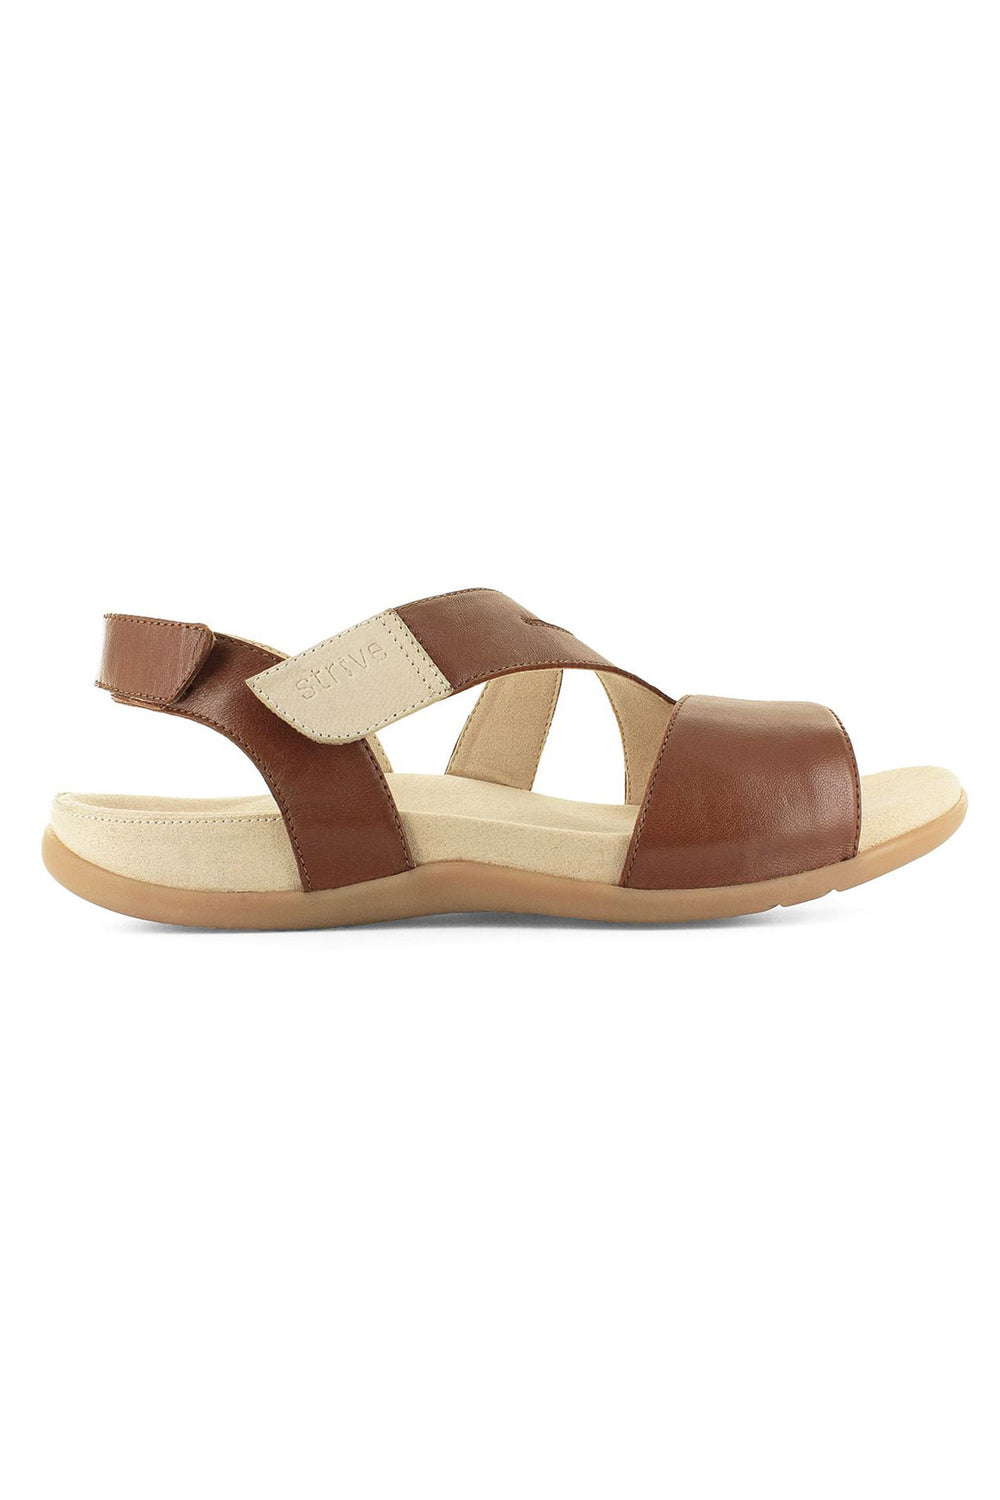 Strive Jinny Tan Brown Leather Memory Foam Footbed Sandal - Shirley Allum Boutique